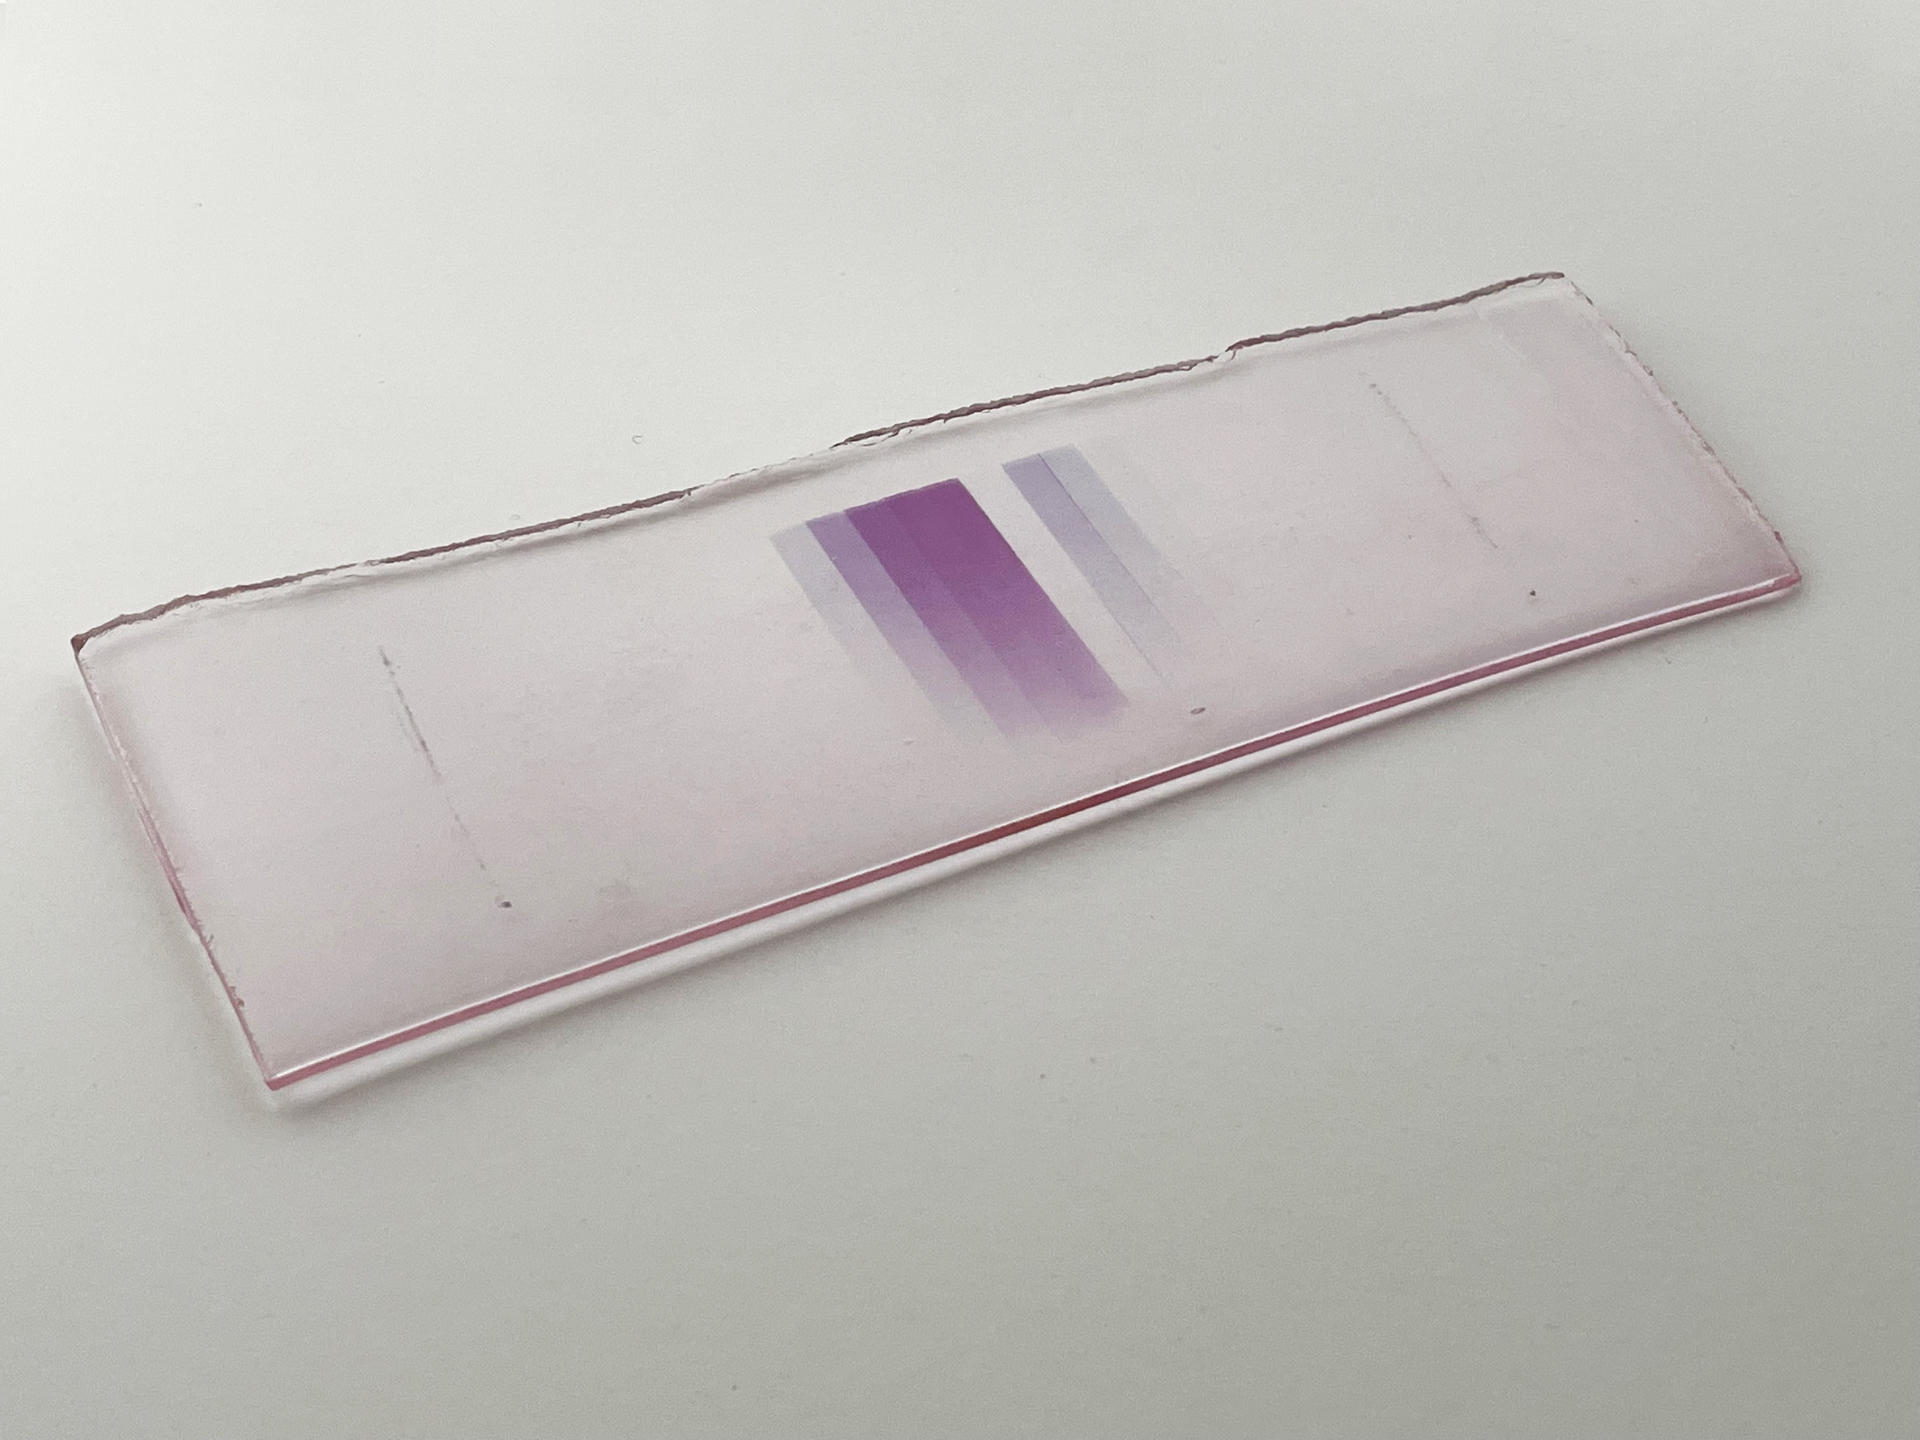 A piece of glass with a gradient of purple lines at its center.